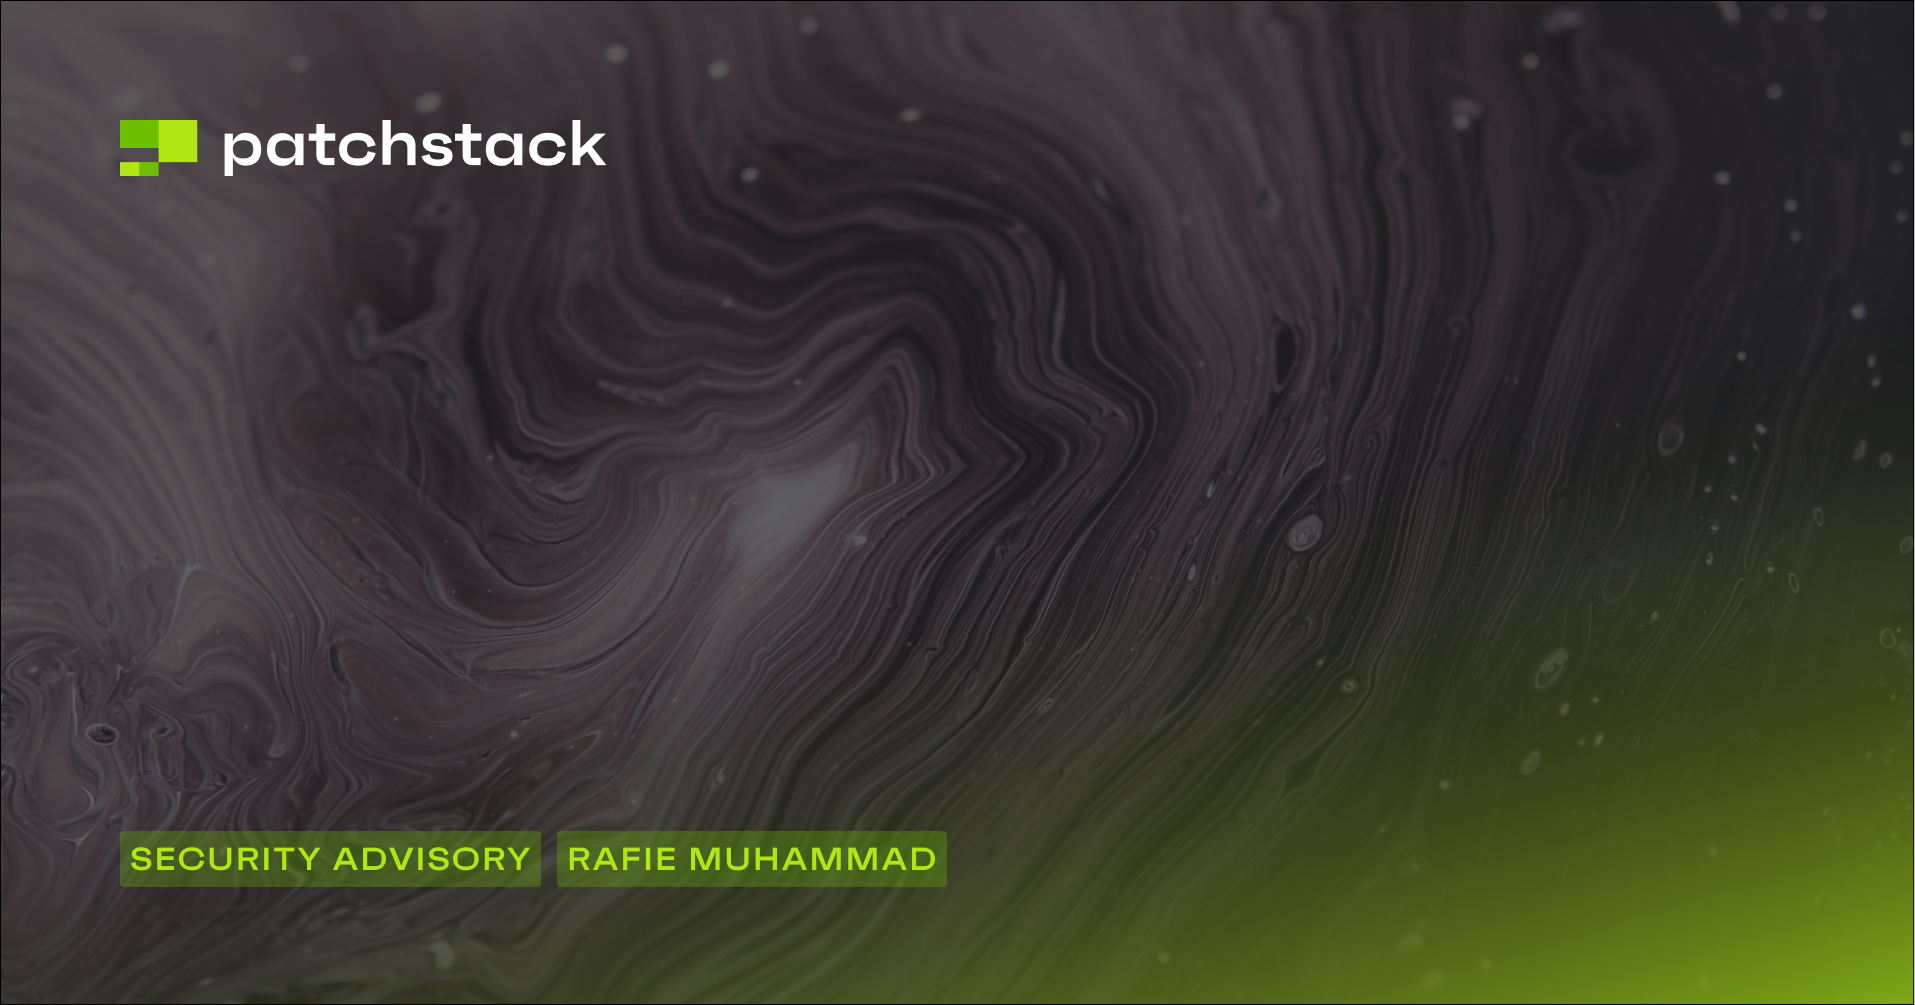 jupiter x core vulnerability patched - patchstack social - rafie mohammad